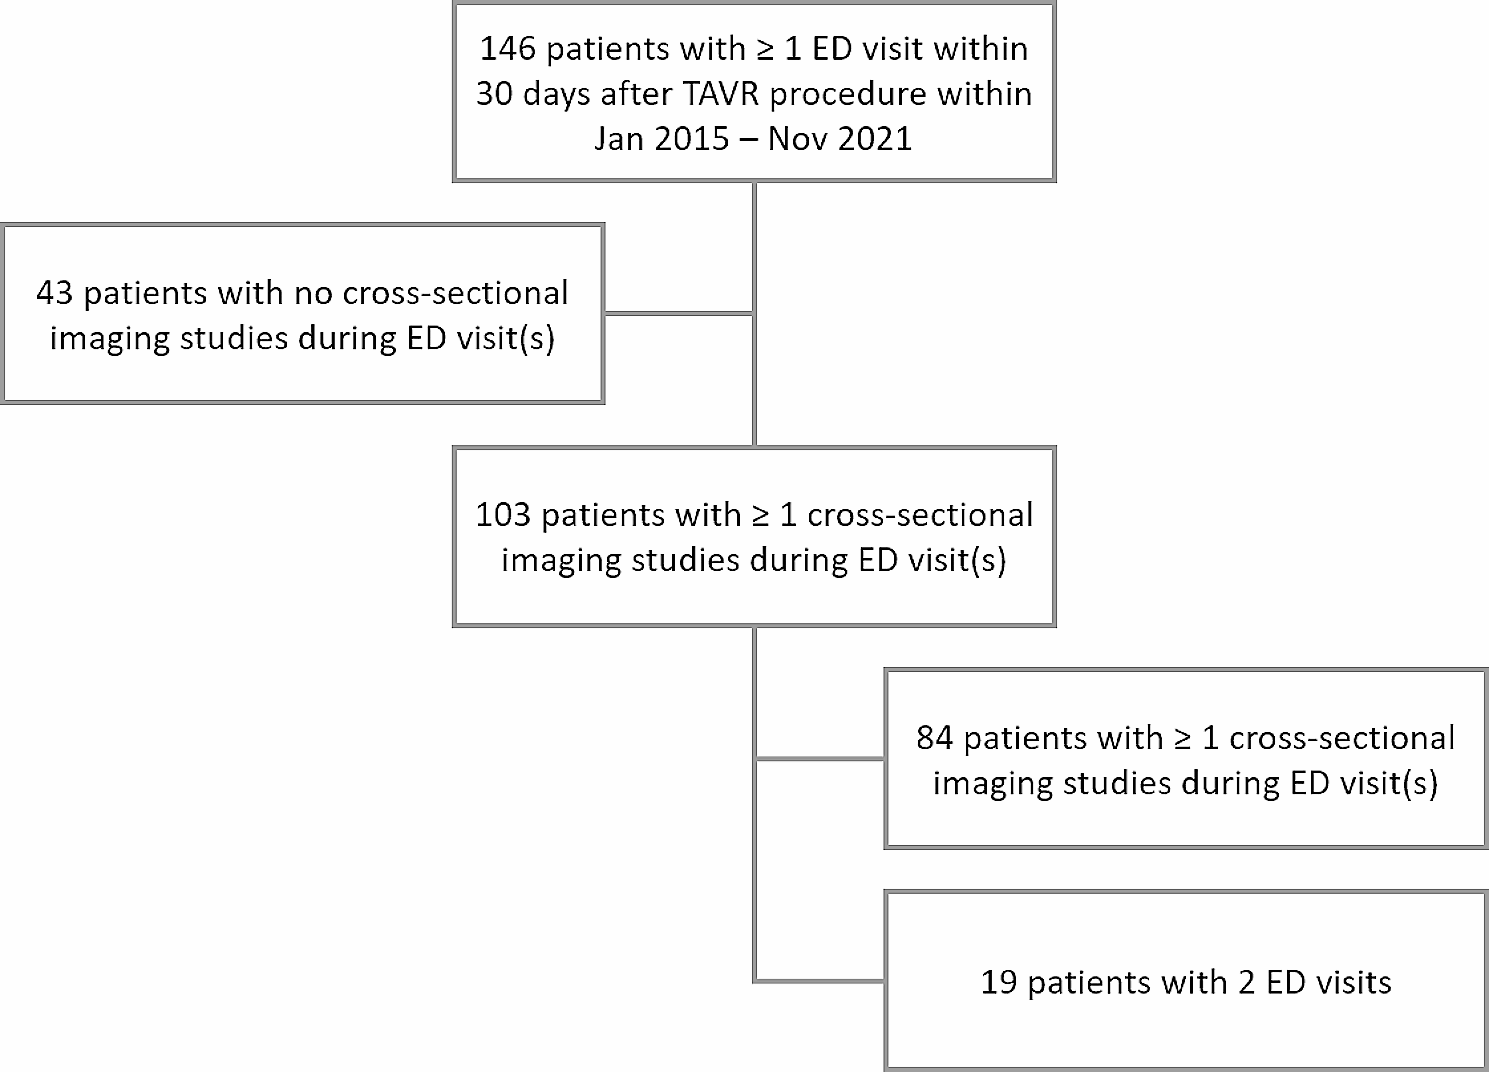 Emergency department imaging utilization post-transcatheter aortic valve replacement: single institution 7-year experience